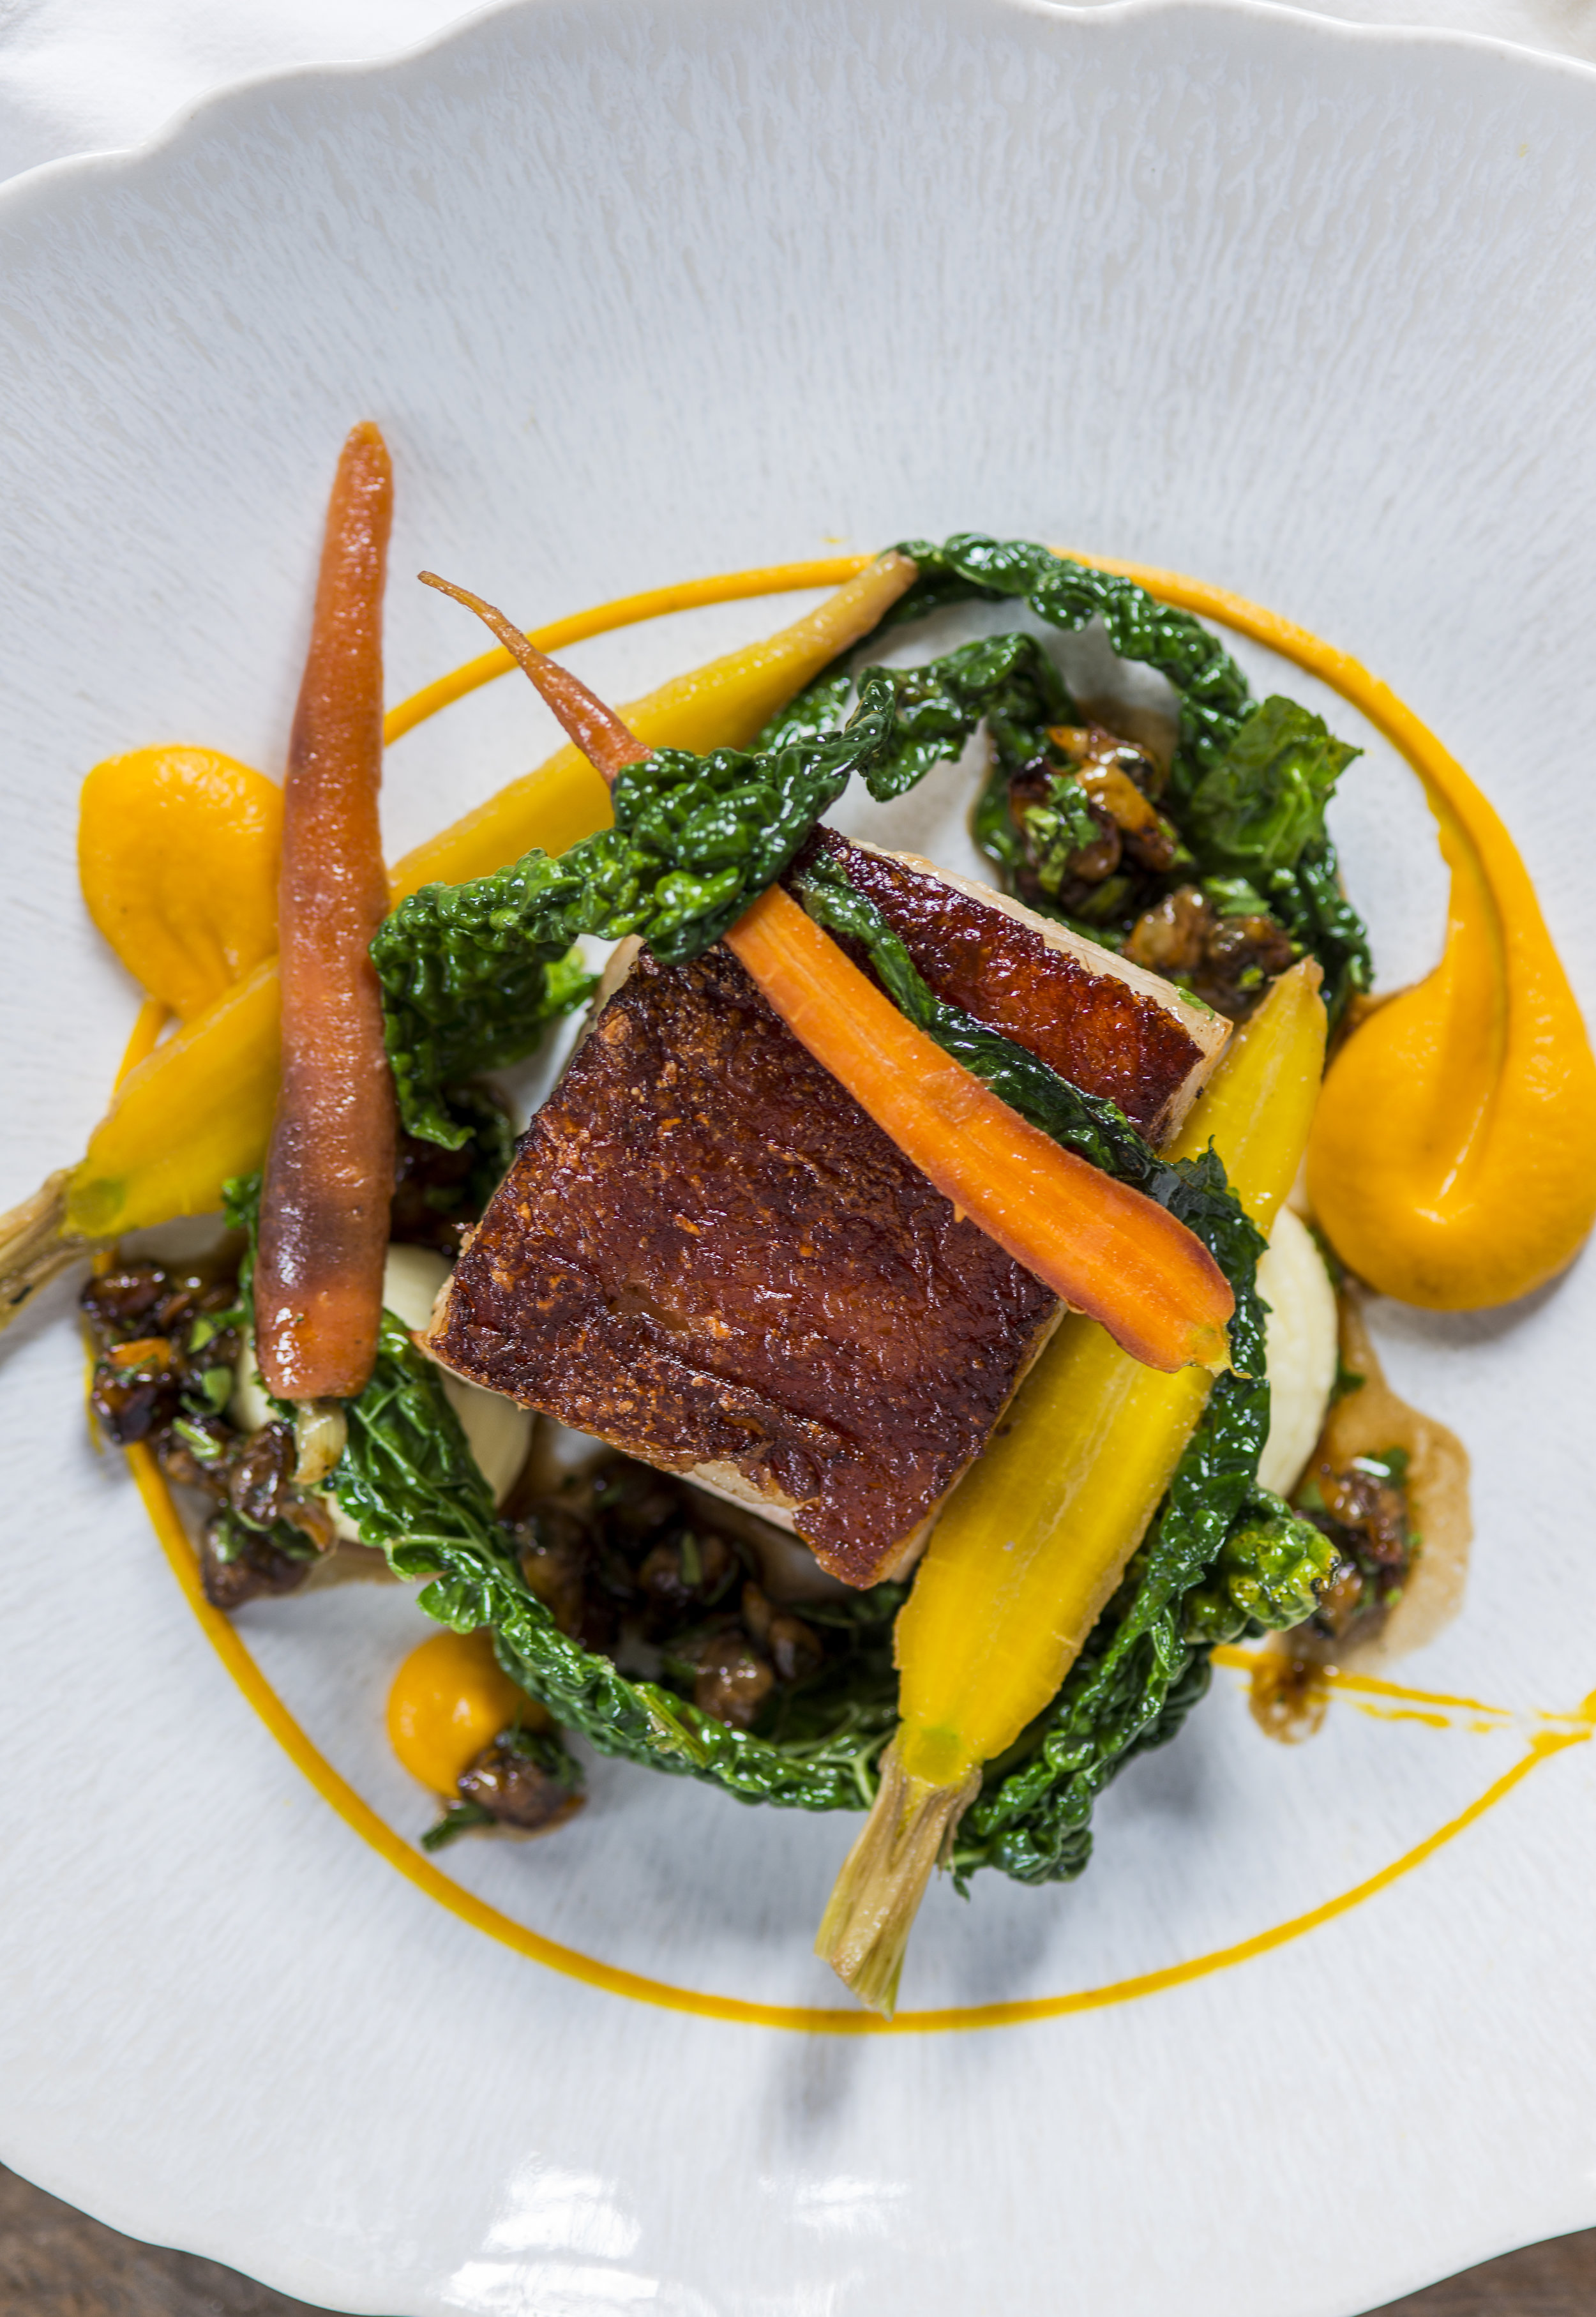 Porkbelly with heritage carrots